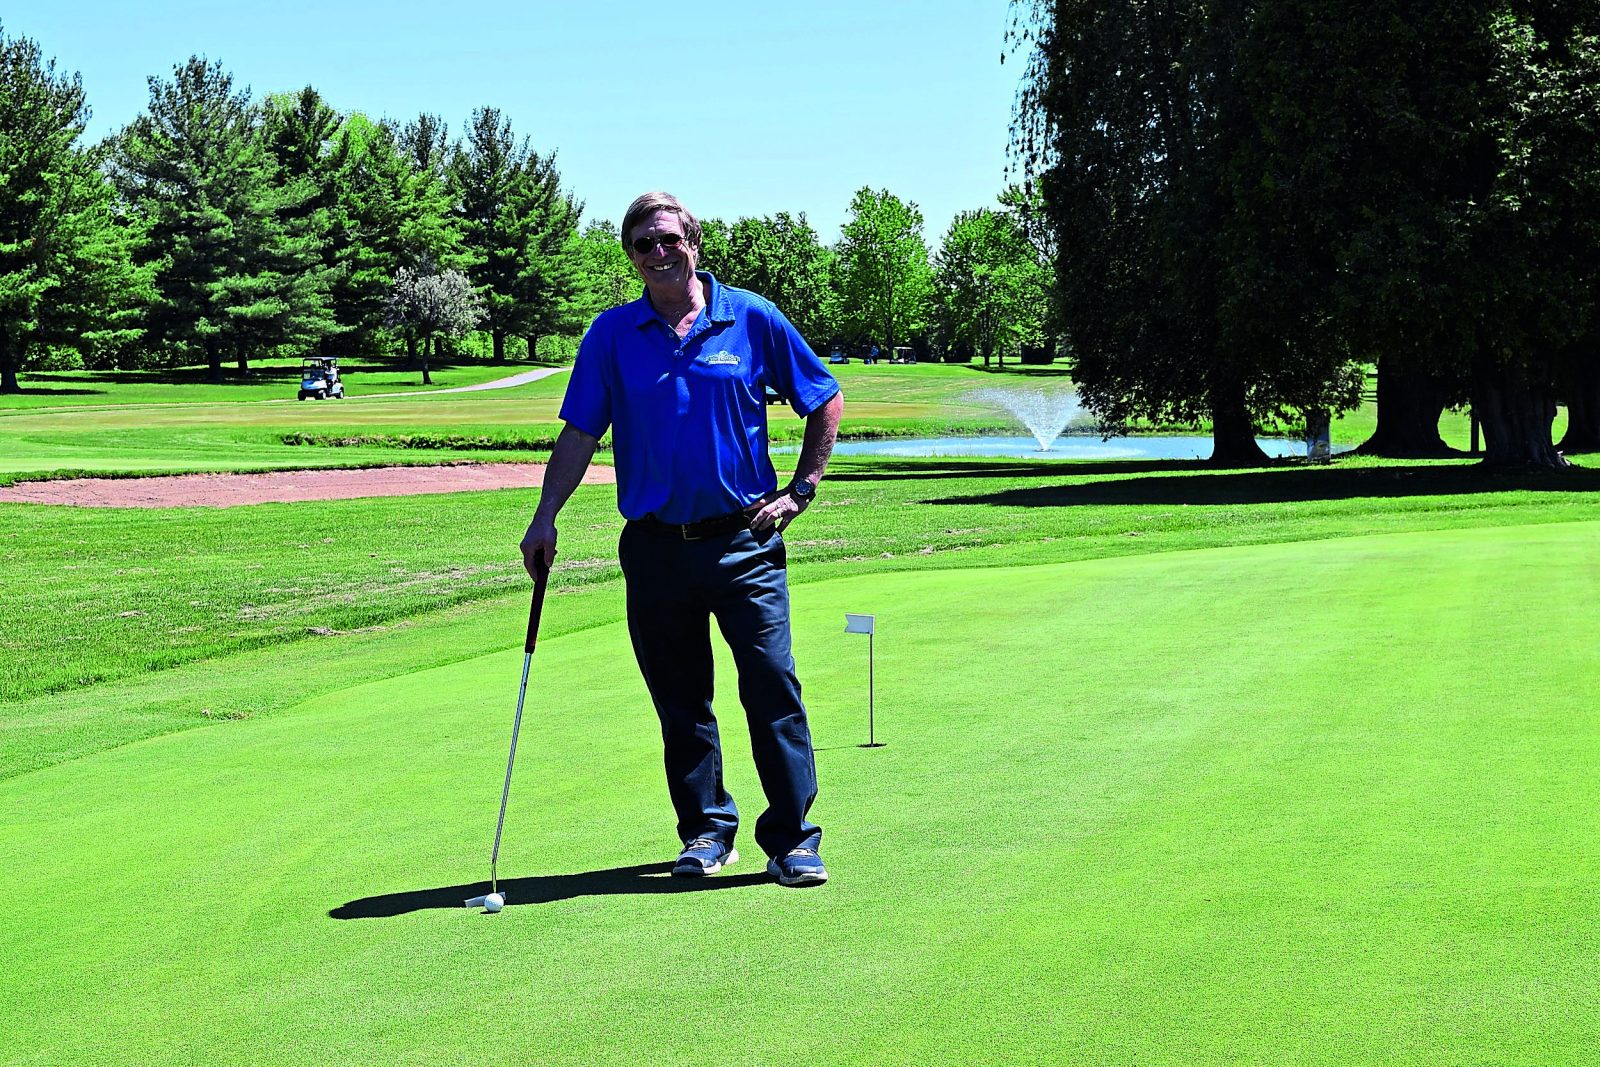 Golfers return to the green at Summerheights